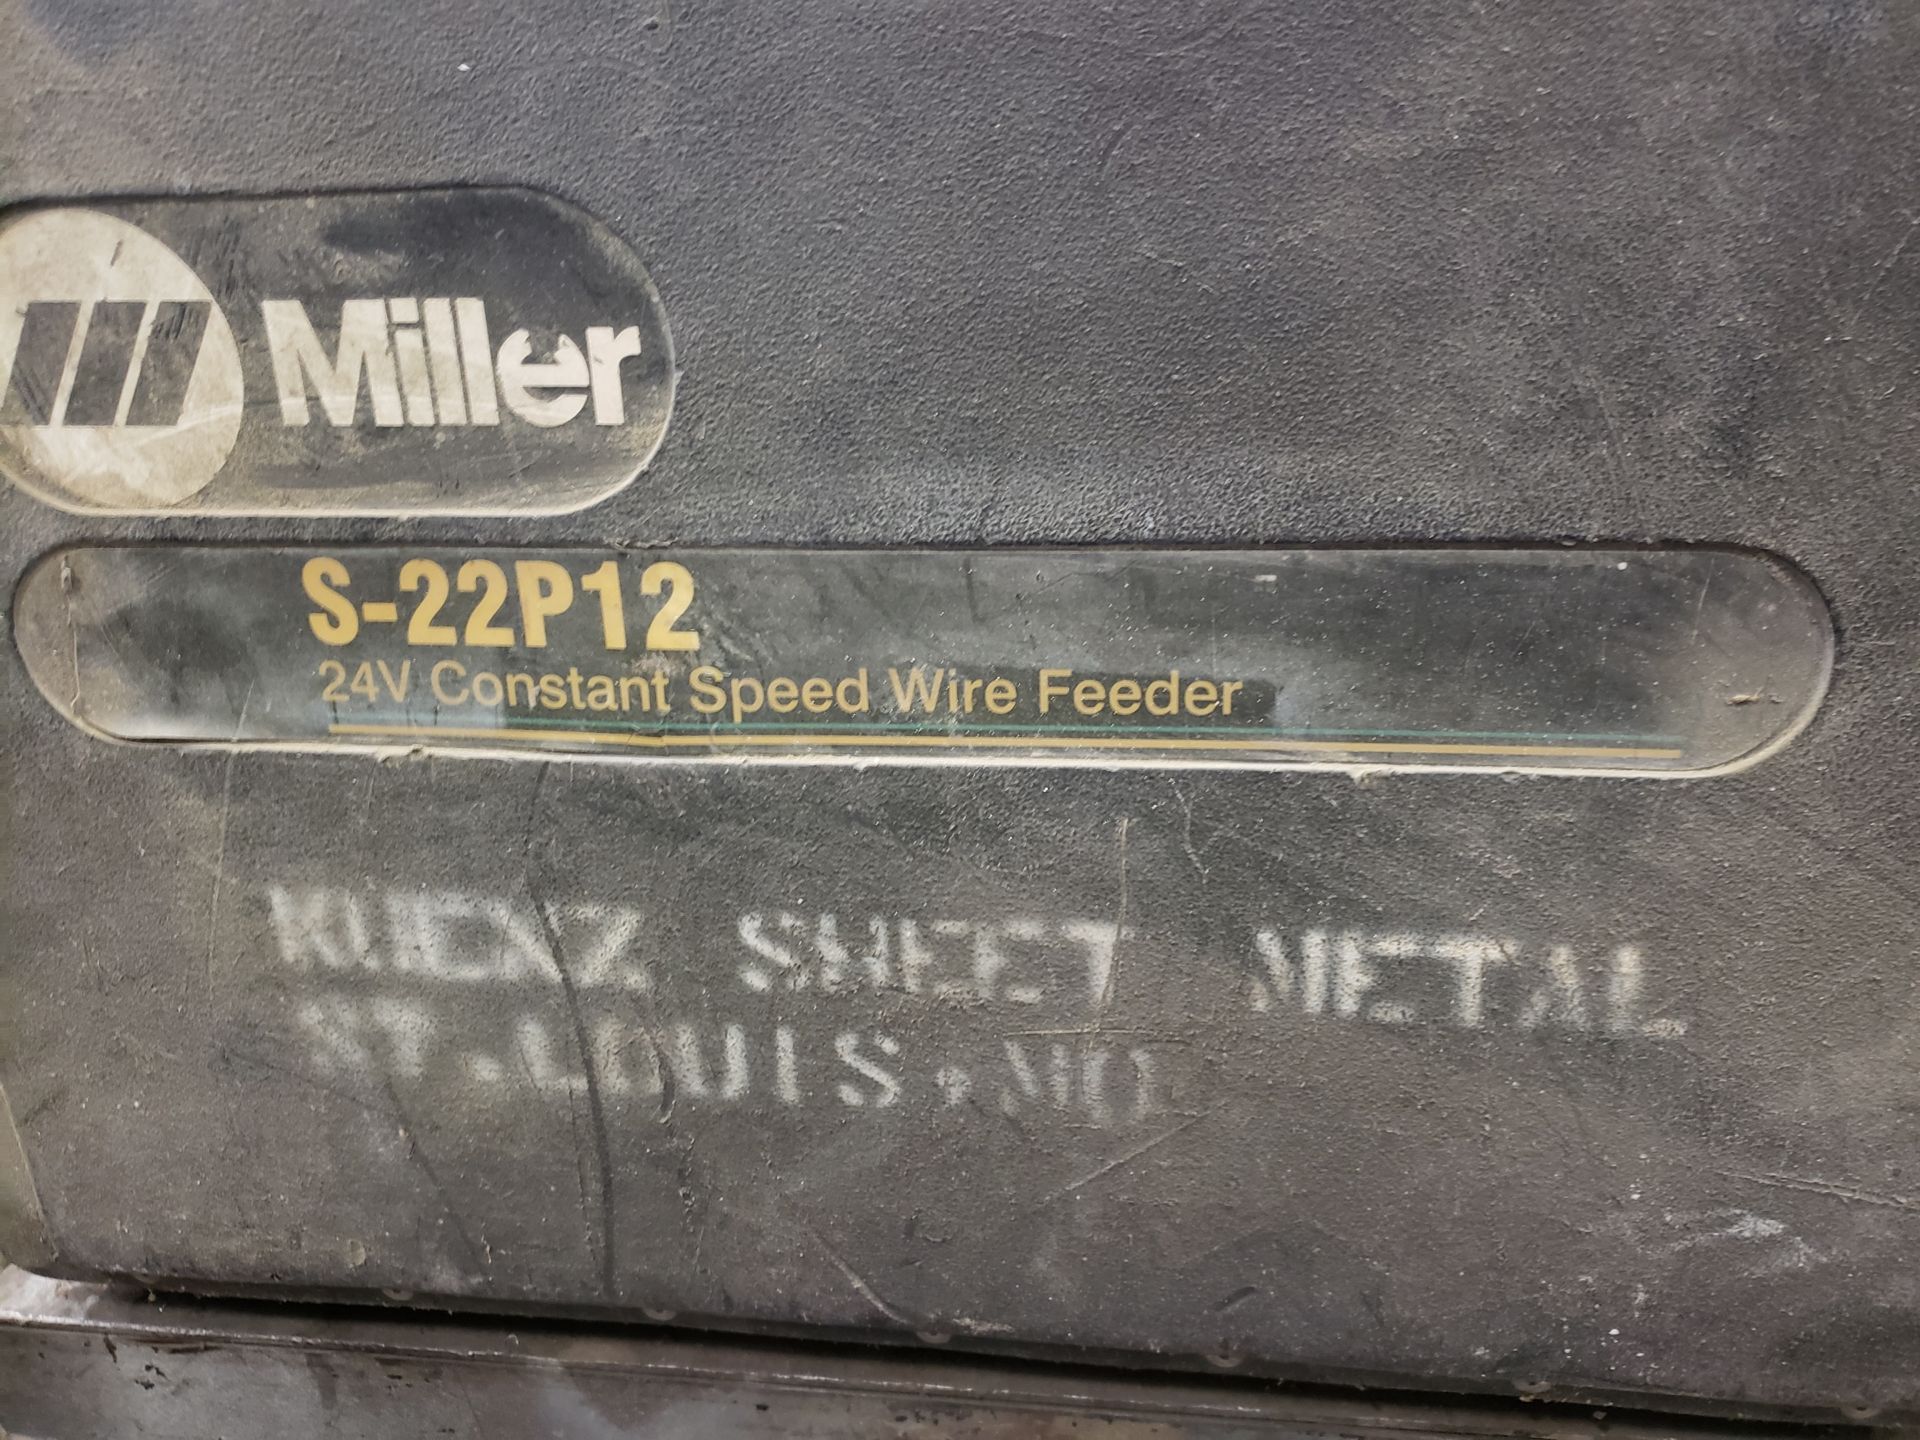 Miller S-22 P12 Wire Feed - Image 2 of 3